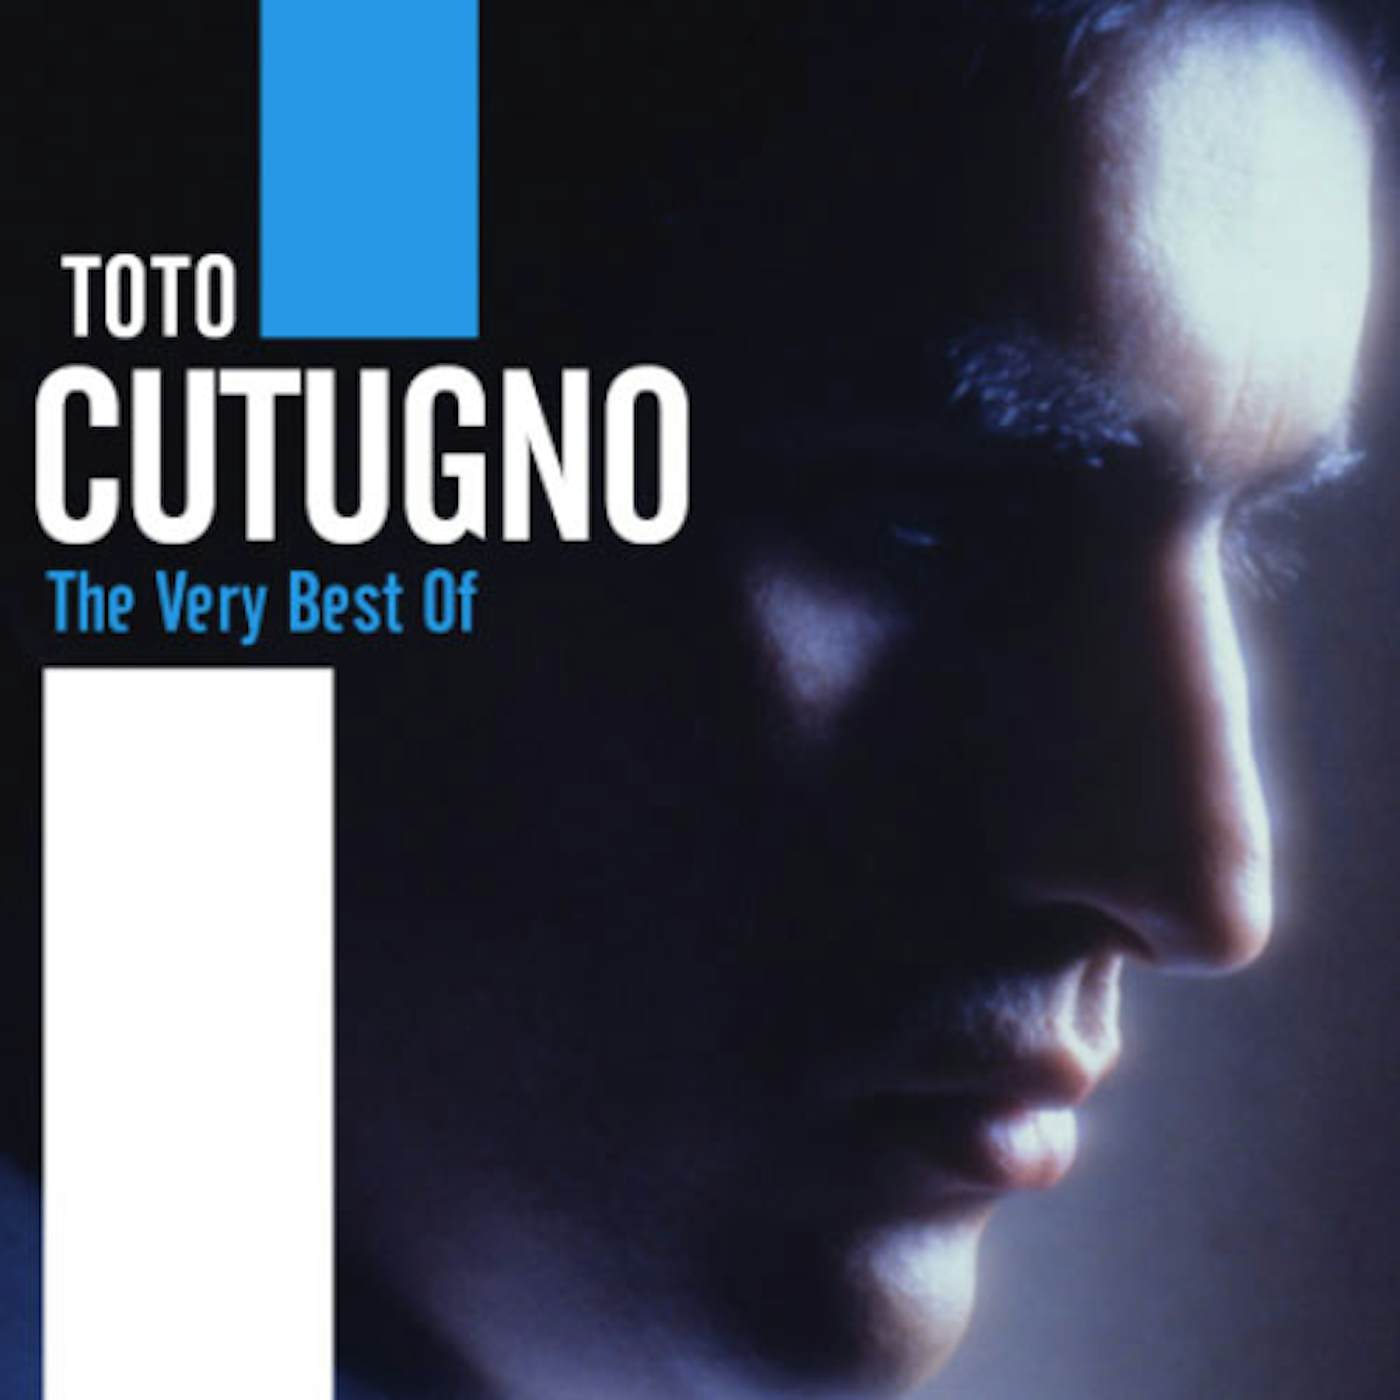 Toto Cutugno VERY BEST OF CD